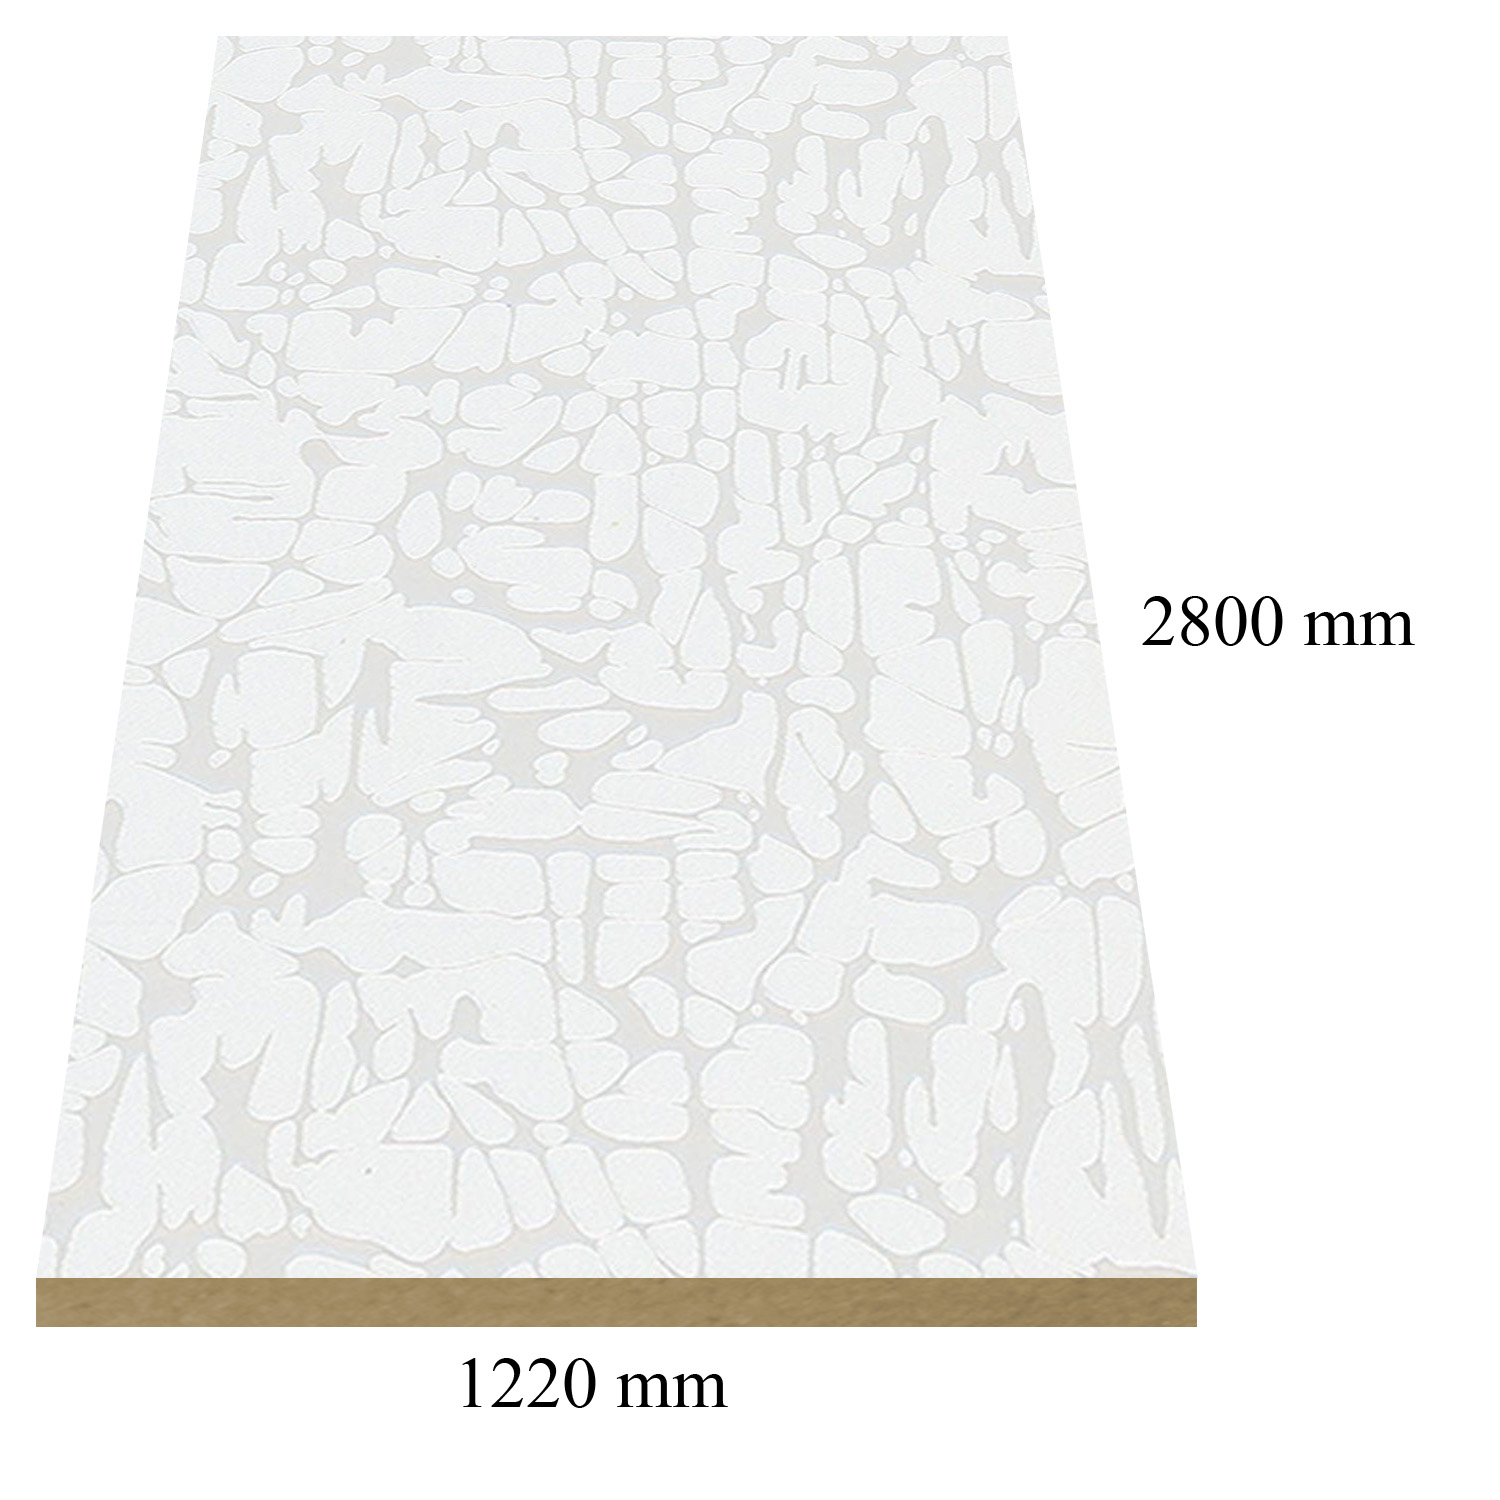 6107 /502 Chaos white matte - PVC coated 18 mm MDF